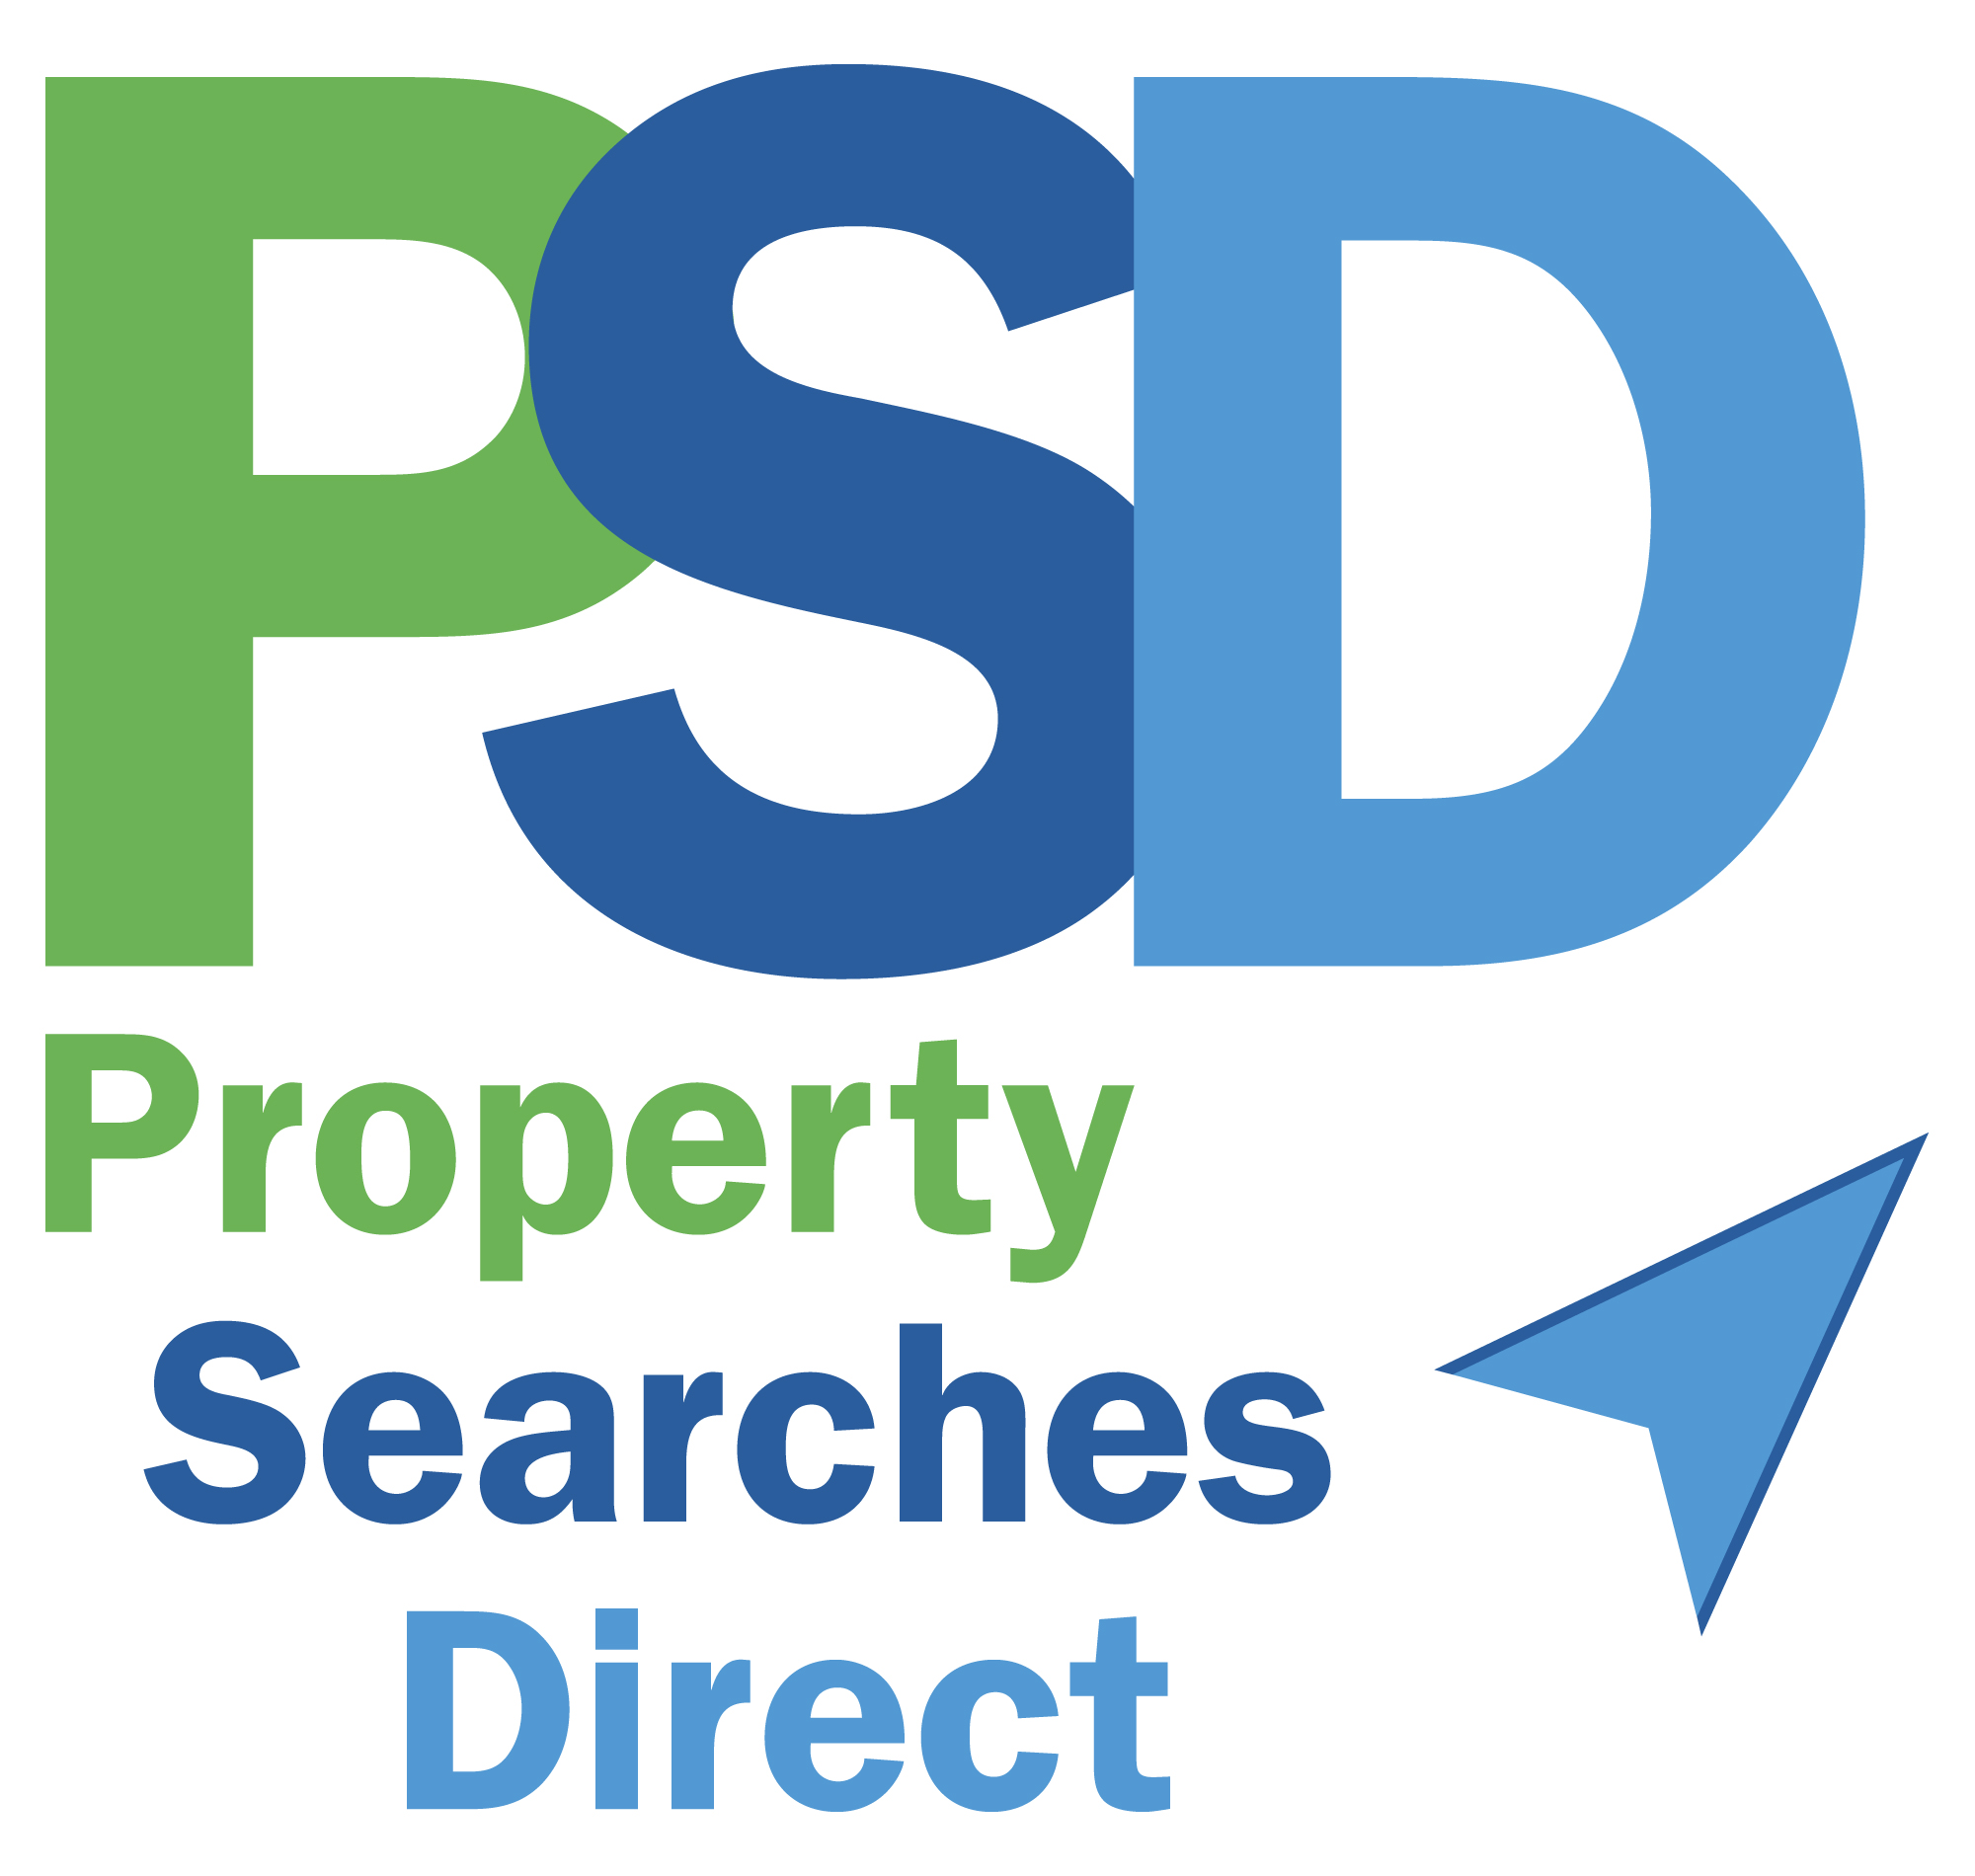 Property Searches Direct / PSD Logbooks